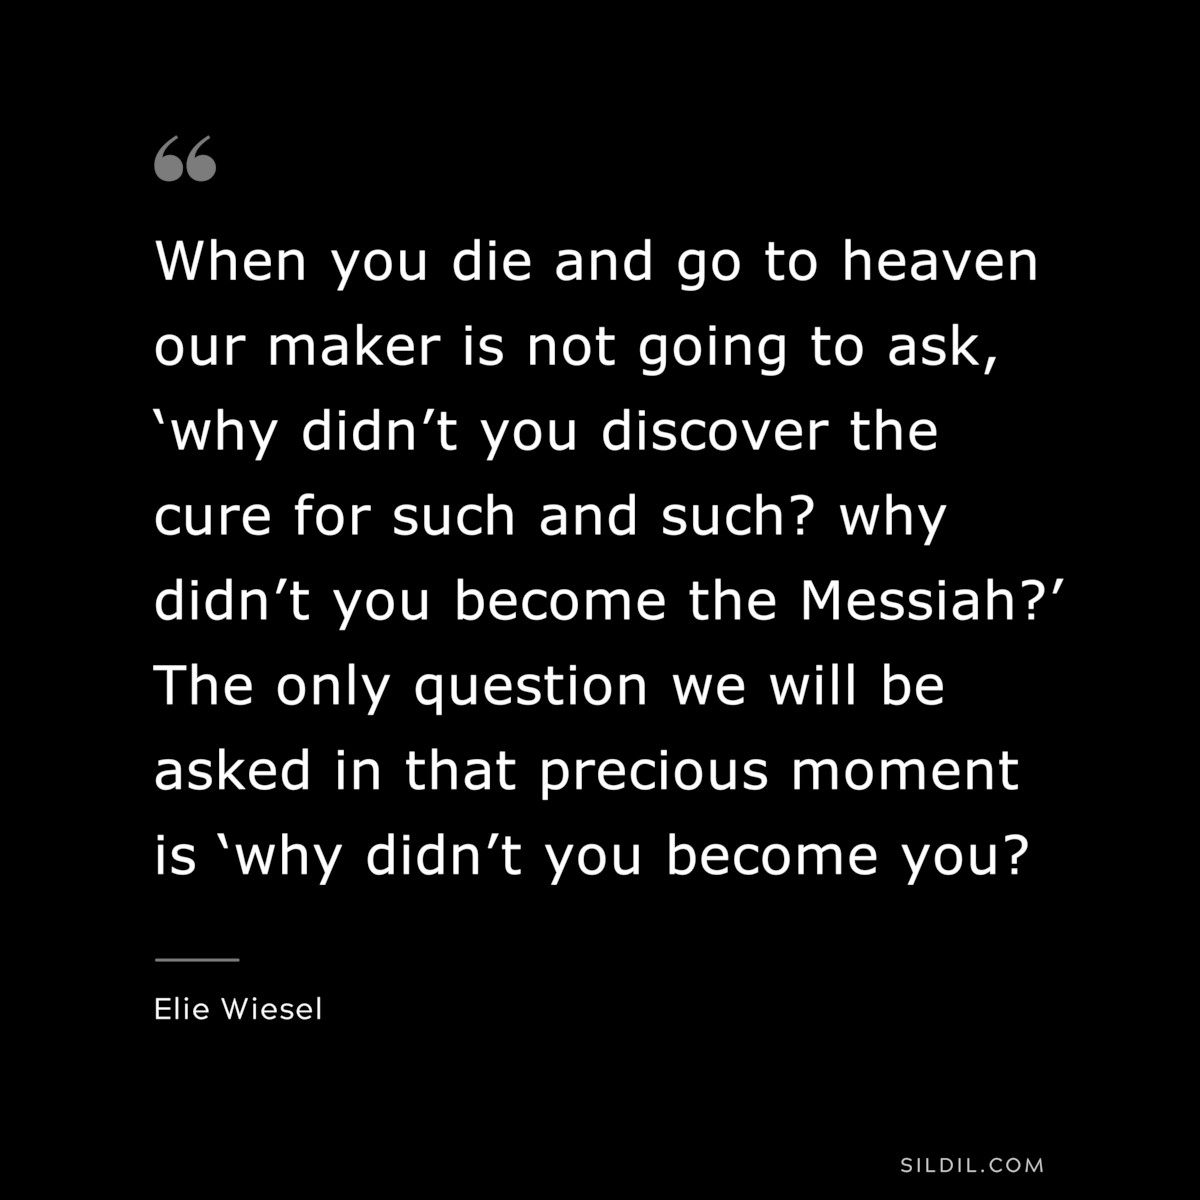 When you die and go to heaven our maker is not going to ask, ‘why didn’t you discover the cure for such and such? why didn’t you become the Messiah?’ The only question we will be asked in that precious moment is ‘why didn’t you become you? ― Elie Wiesel